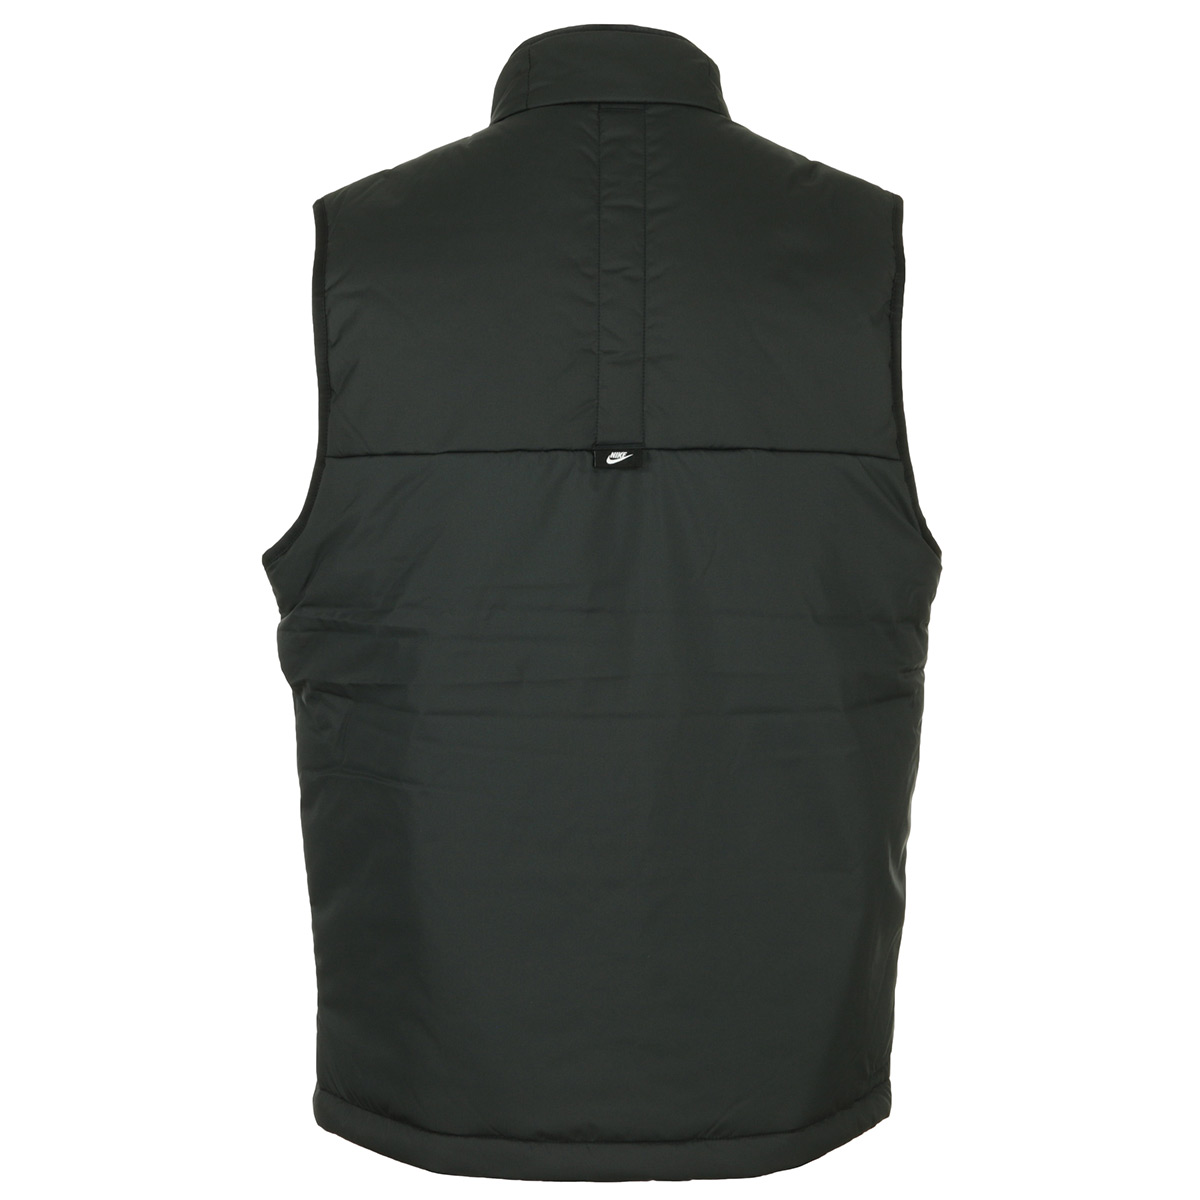 Nike Therma-FIT Legacy Vest